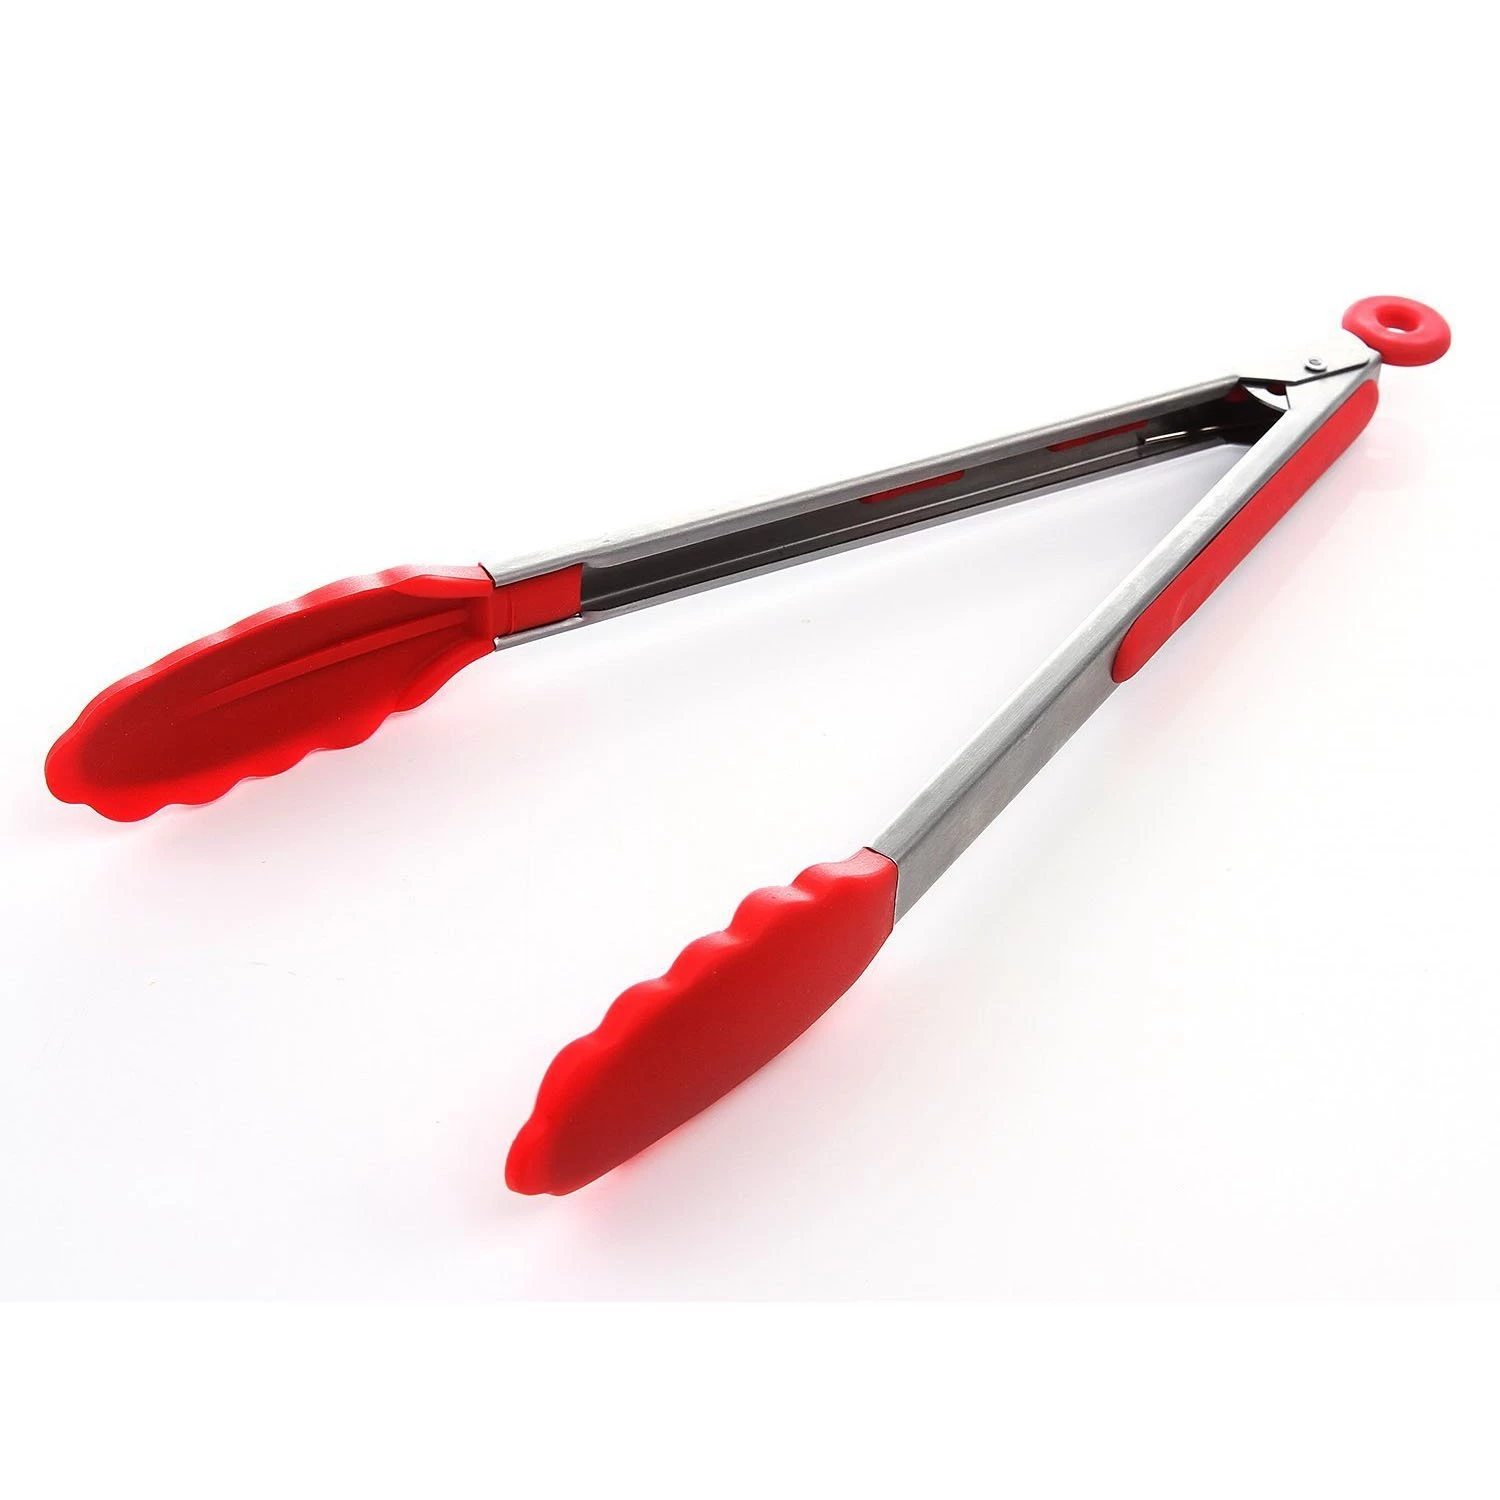 Stainless Steel BBQ tongs come from China Stainless steel Barware factory